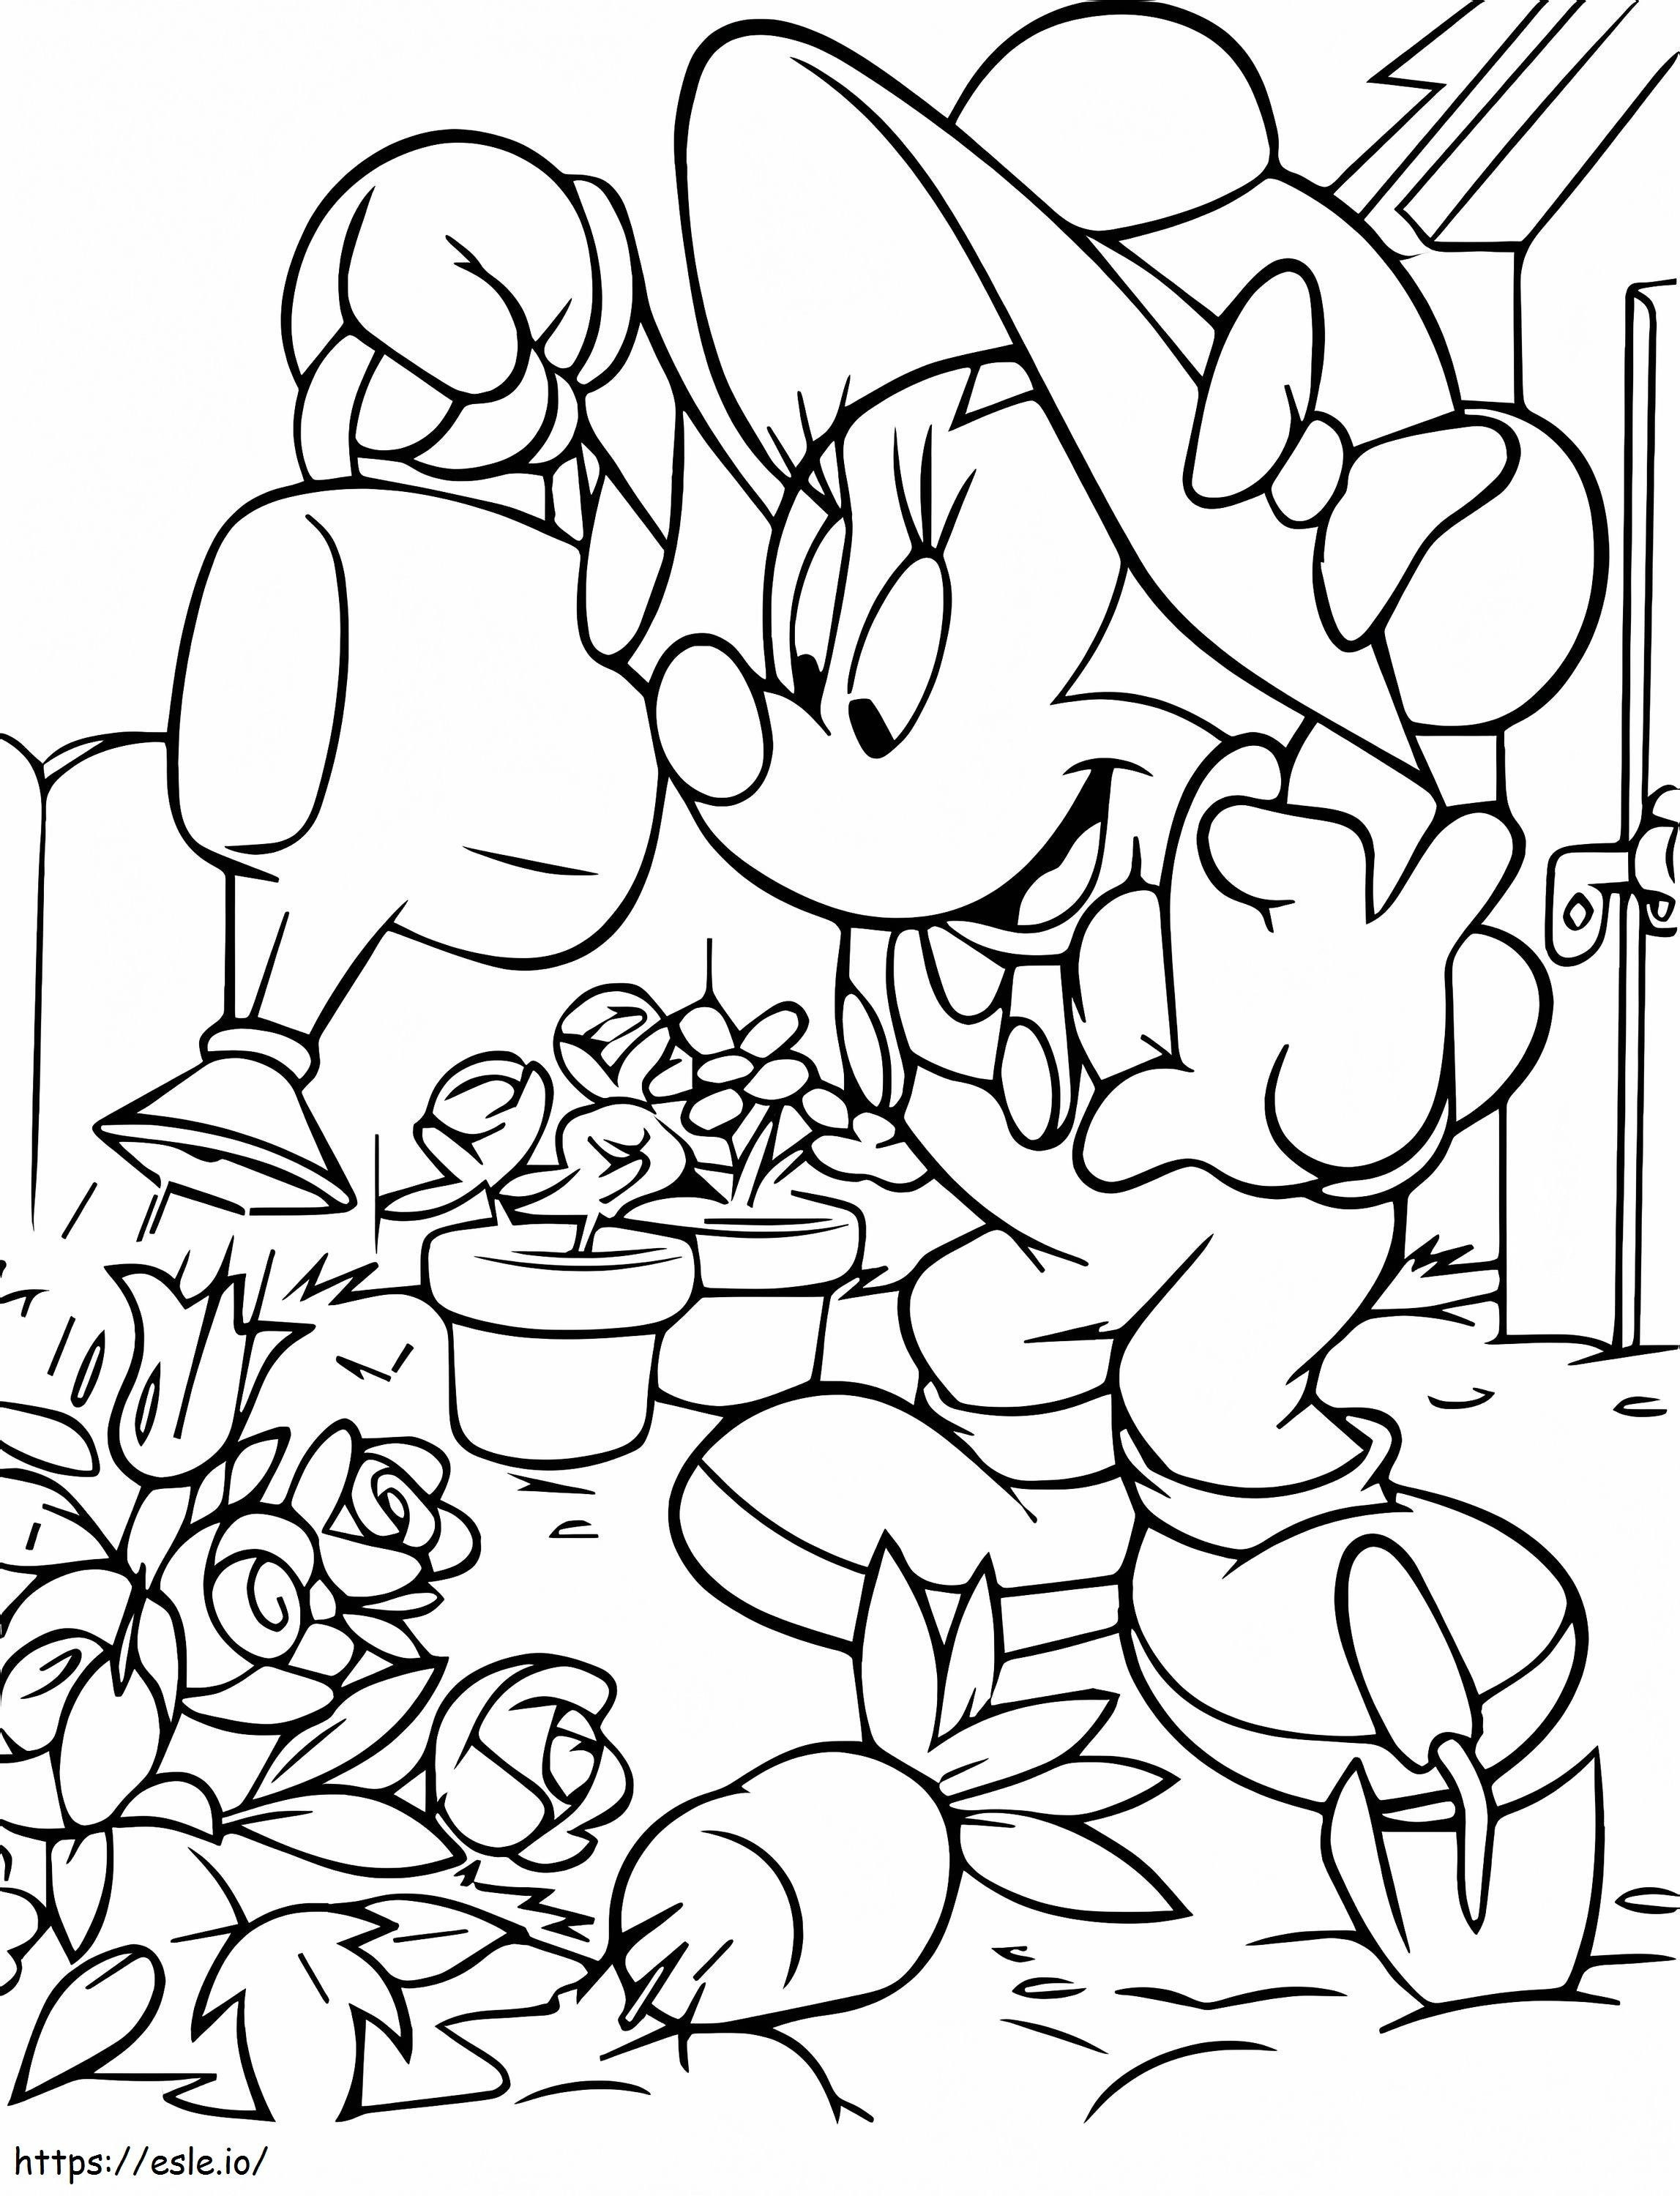 Minnie Mouse In The Garden coloring page